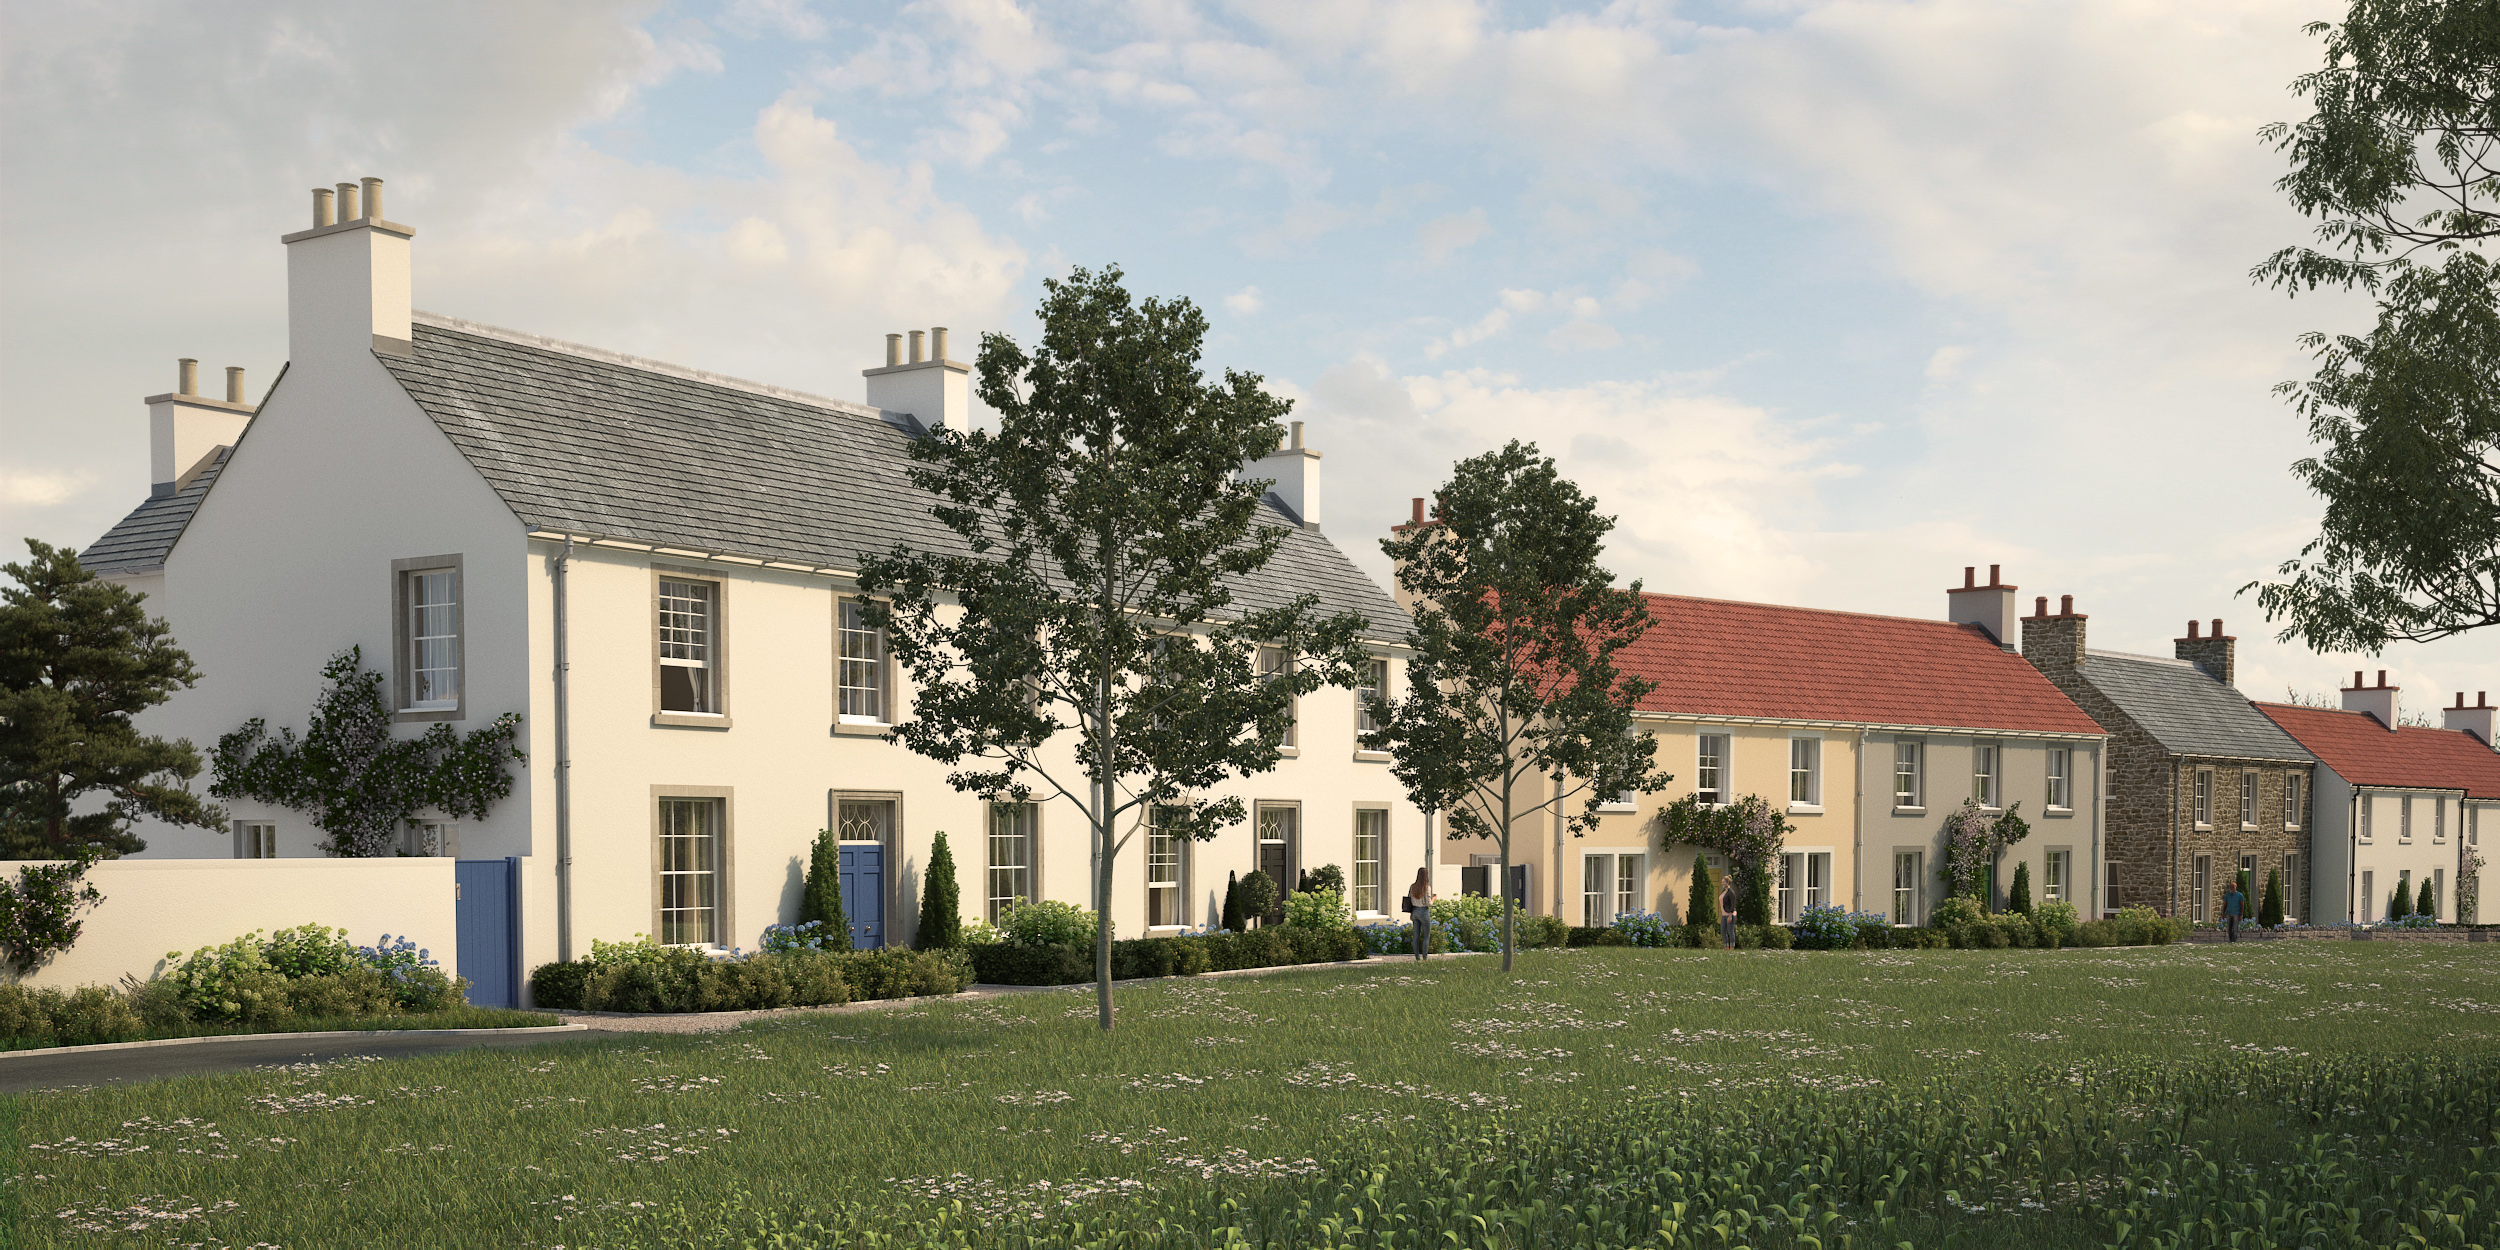 Places for People welcomes green light for first phase of Longniddry village extension